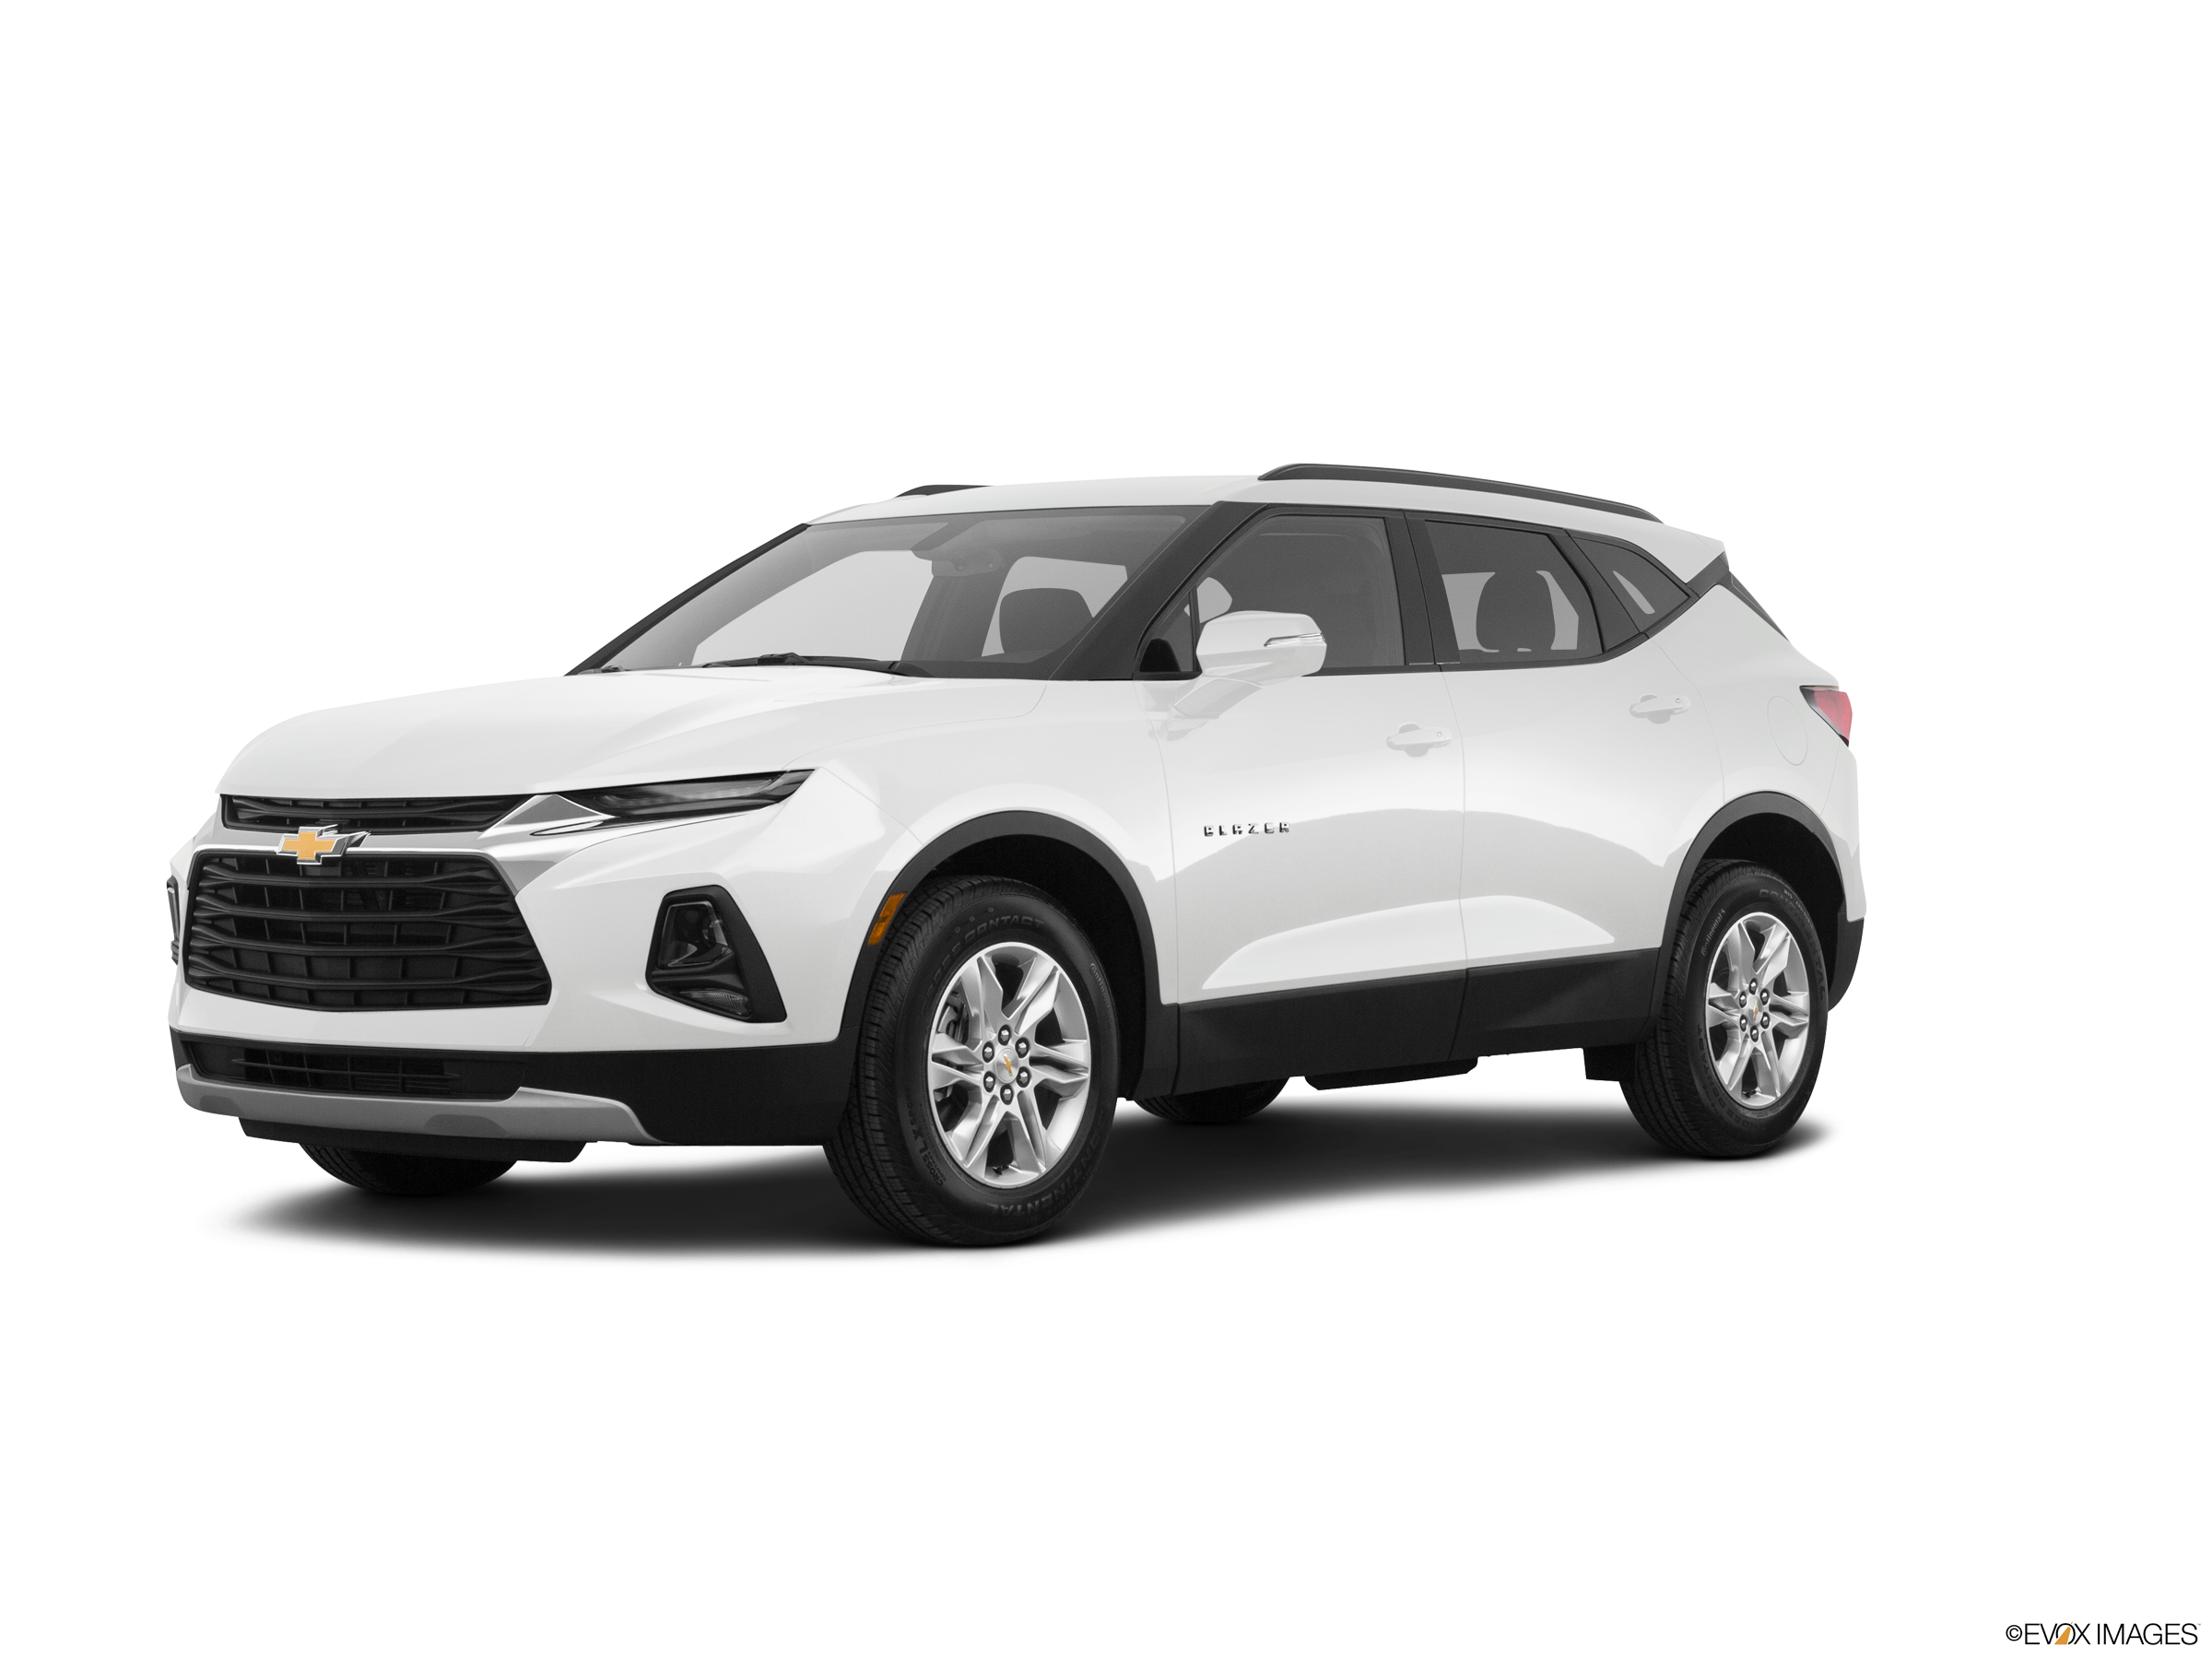 ruler build up Inflates 2022 Chevy Blazer Price, Reviews, Pictures & More | Kelley Blue Book